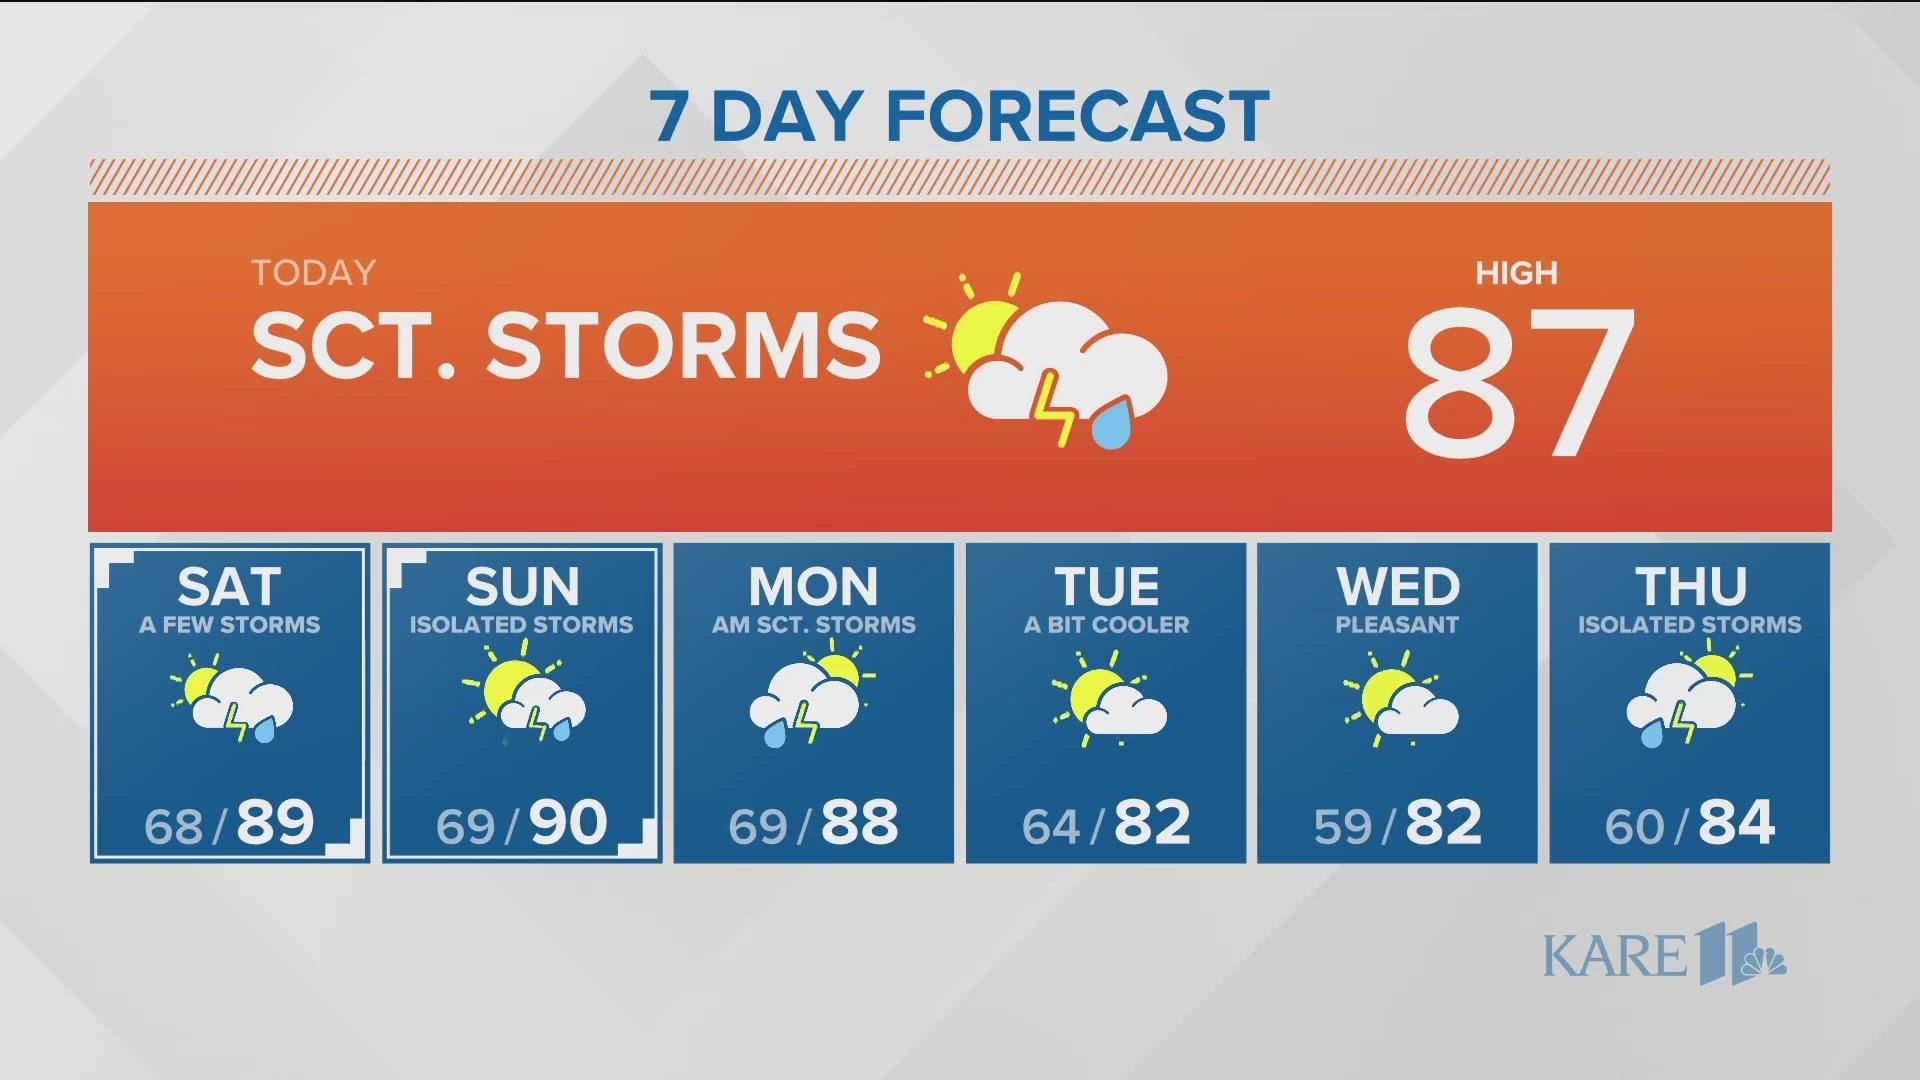 More storms are ahead for today and Saturday, expect isolated storms on Sunday.